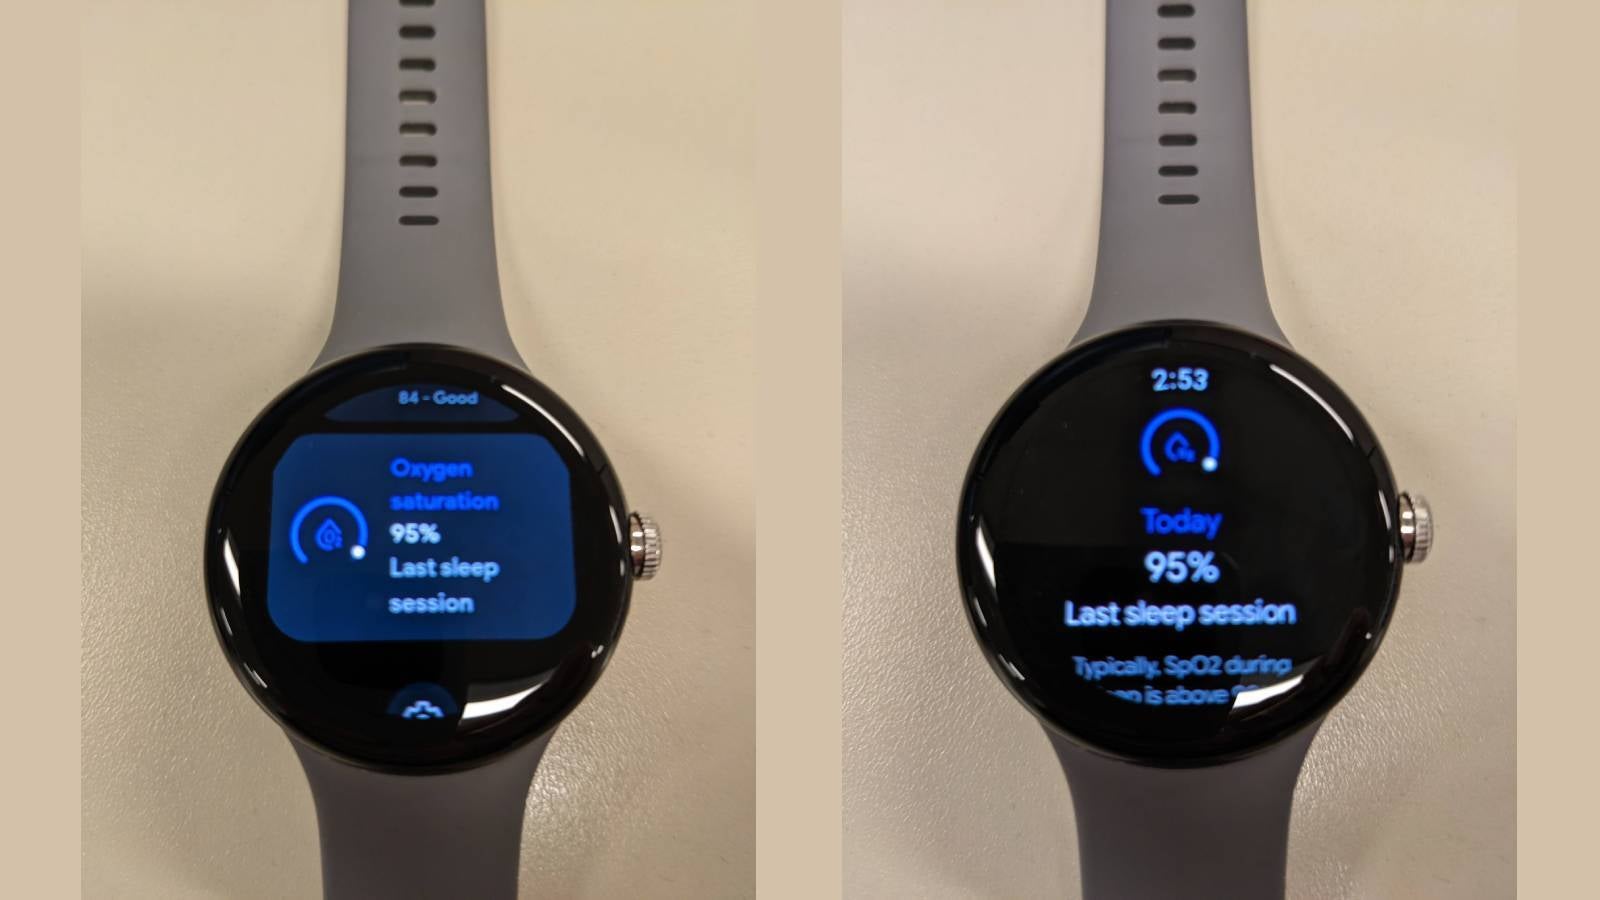 The Pixel Watch's blood oxygen sensor finally put to good use - Pixel Watch users relieved to find a feature that was not there at launch